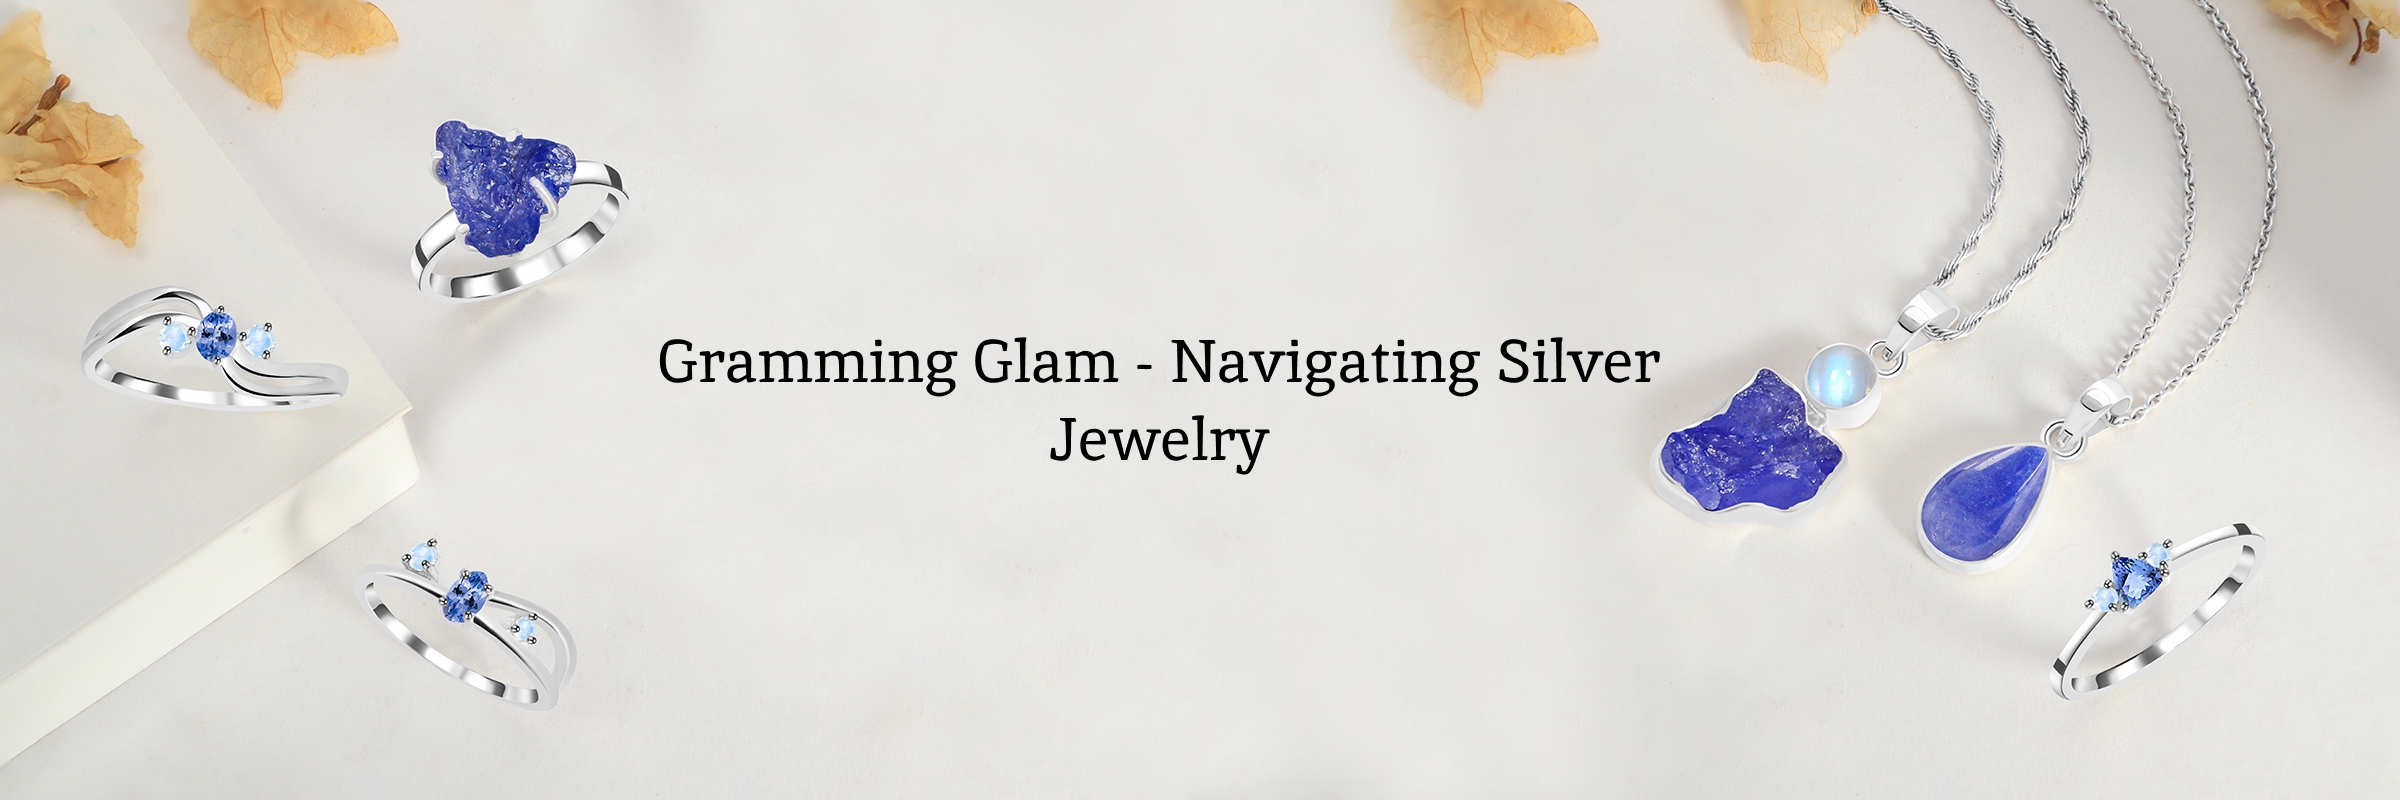 Things You Need To Consider When Buying Silver Jewelry By Gram